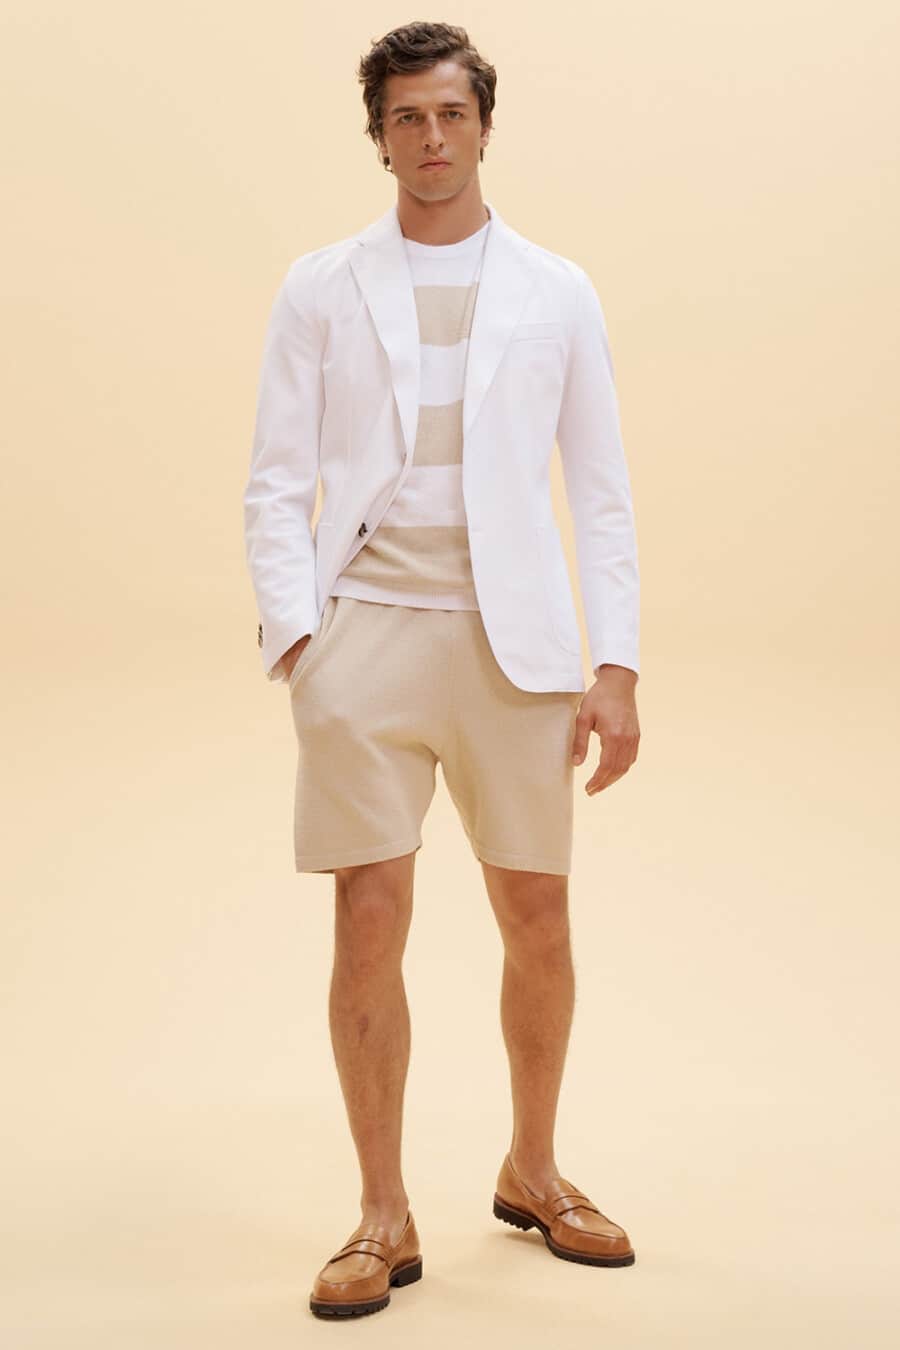 Men's beige tailored shorts, white and beige striped T-shirt, white blazer and tan leather penny loafers outfit